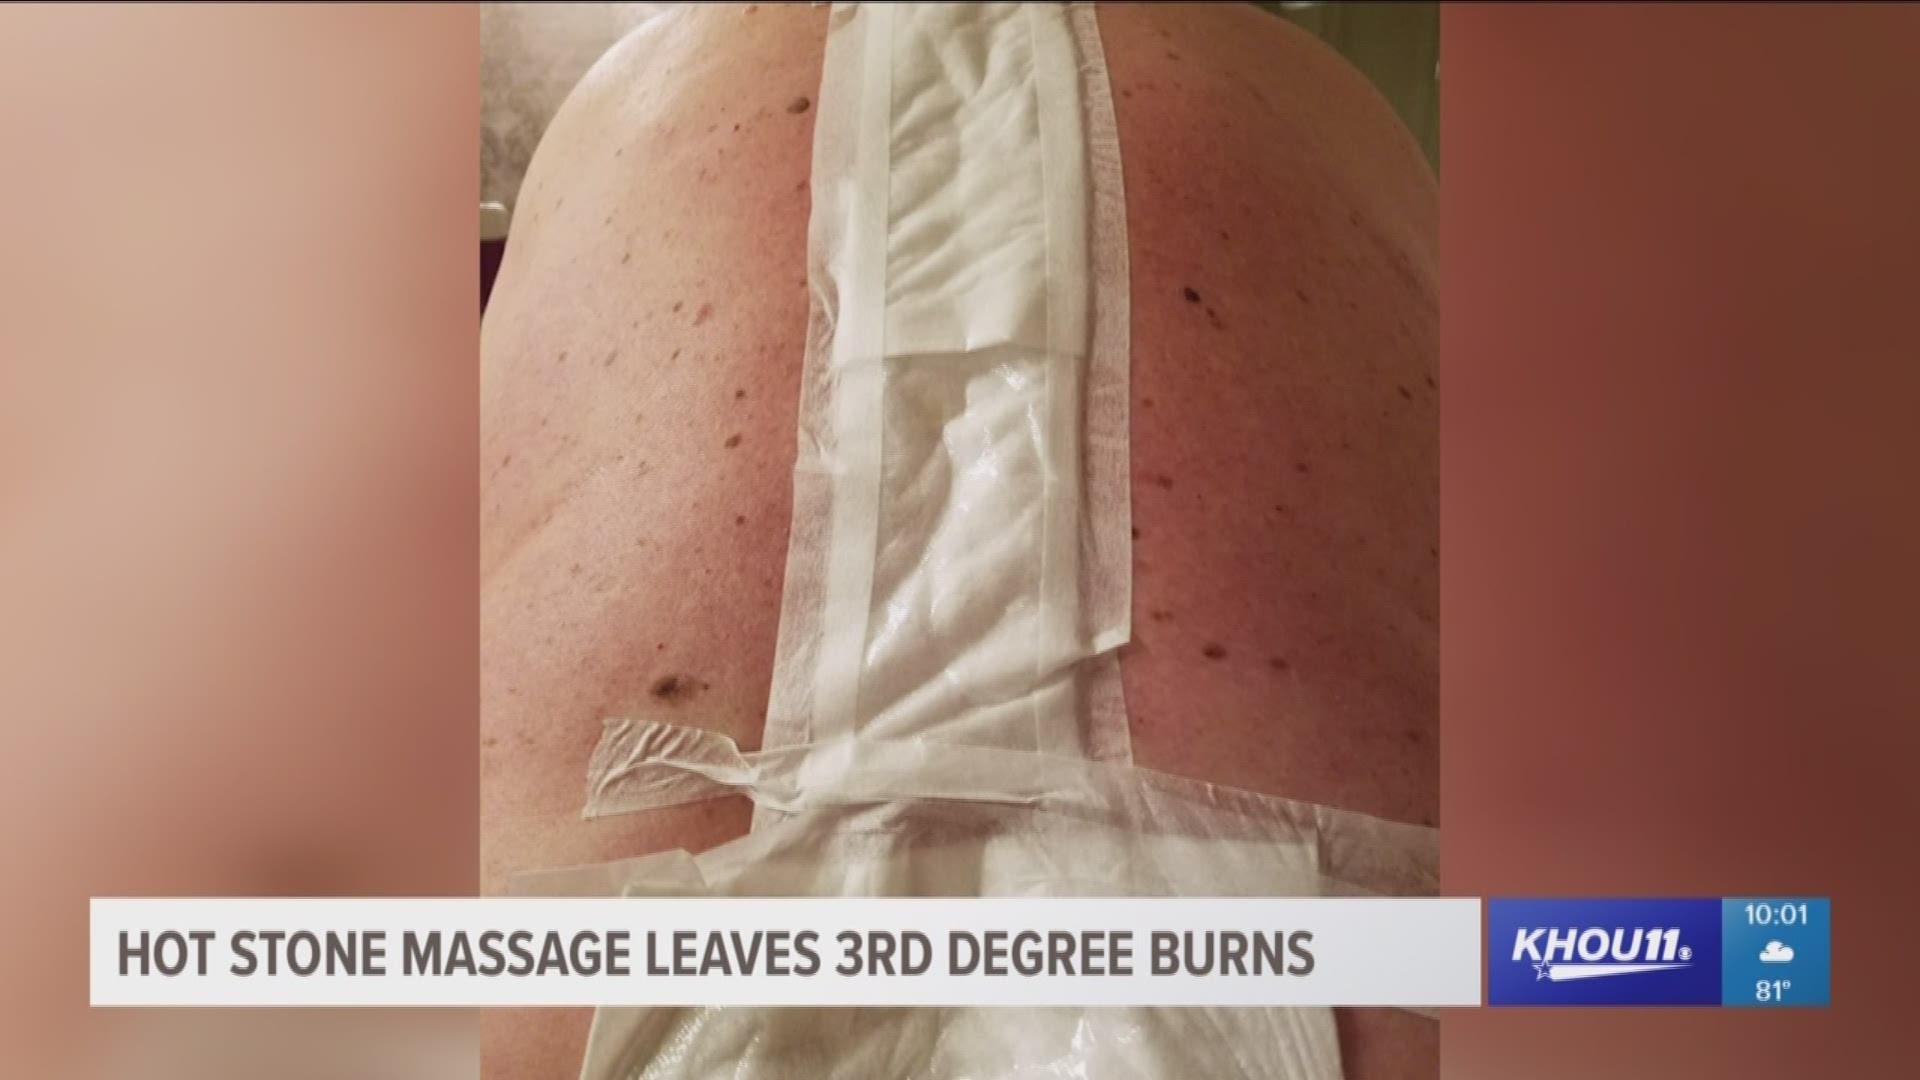 A couple who went into a spa for a massage left with the husband having suffered second- and third-degree burns on his back.